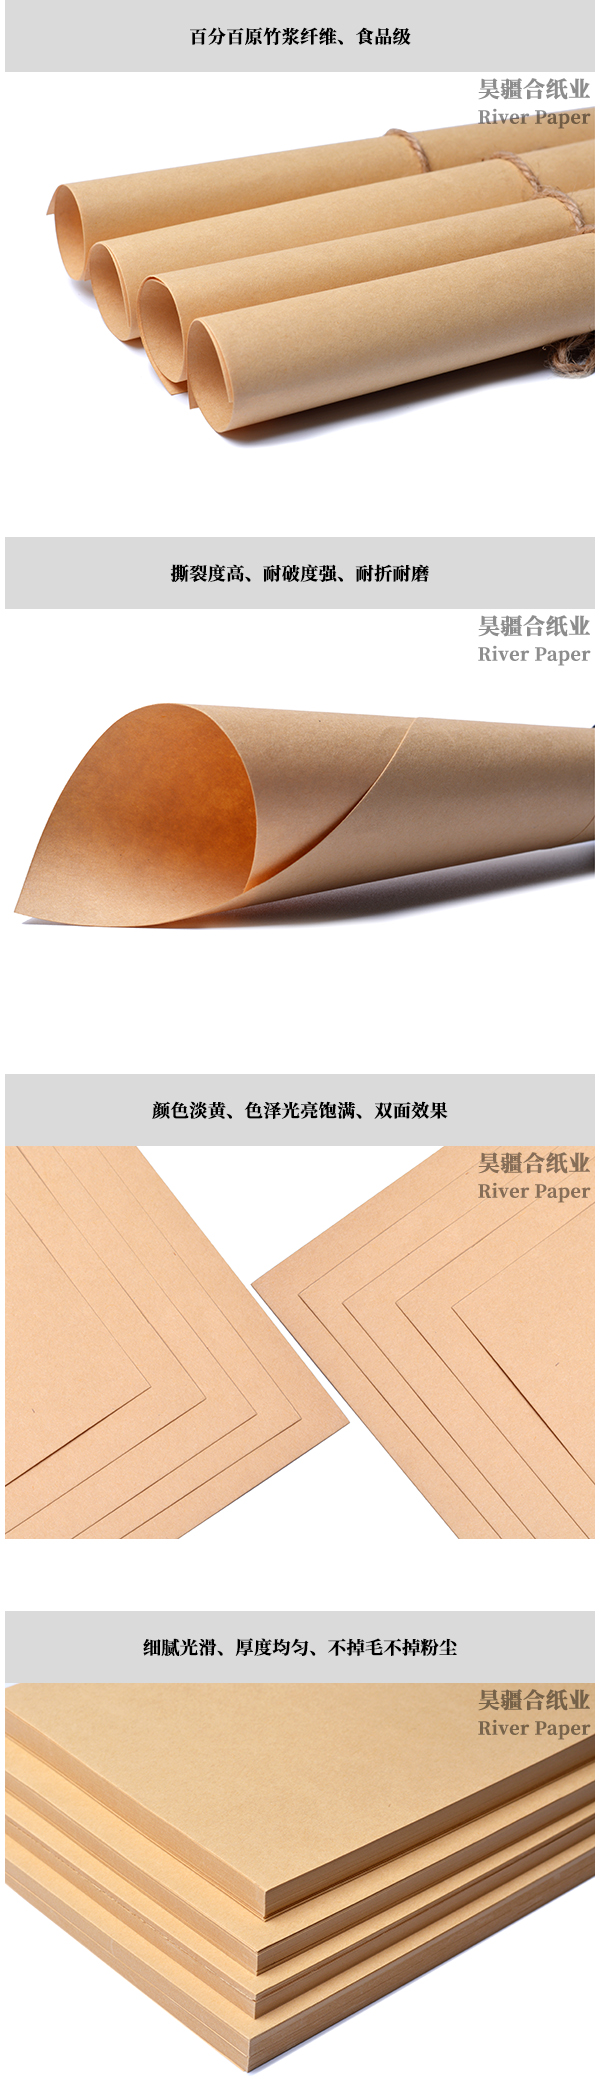 Bamboo and wood refined kraft paper 60-250g